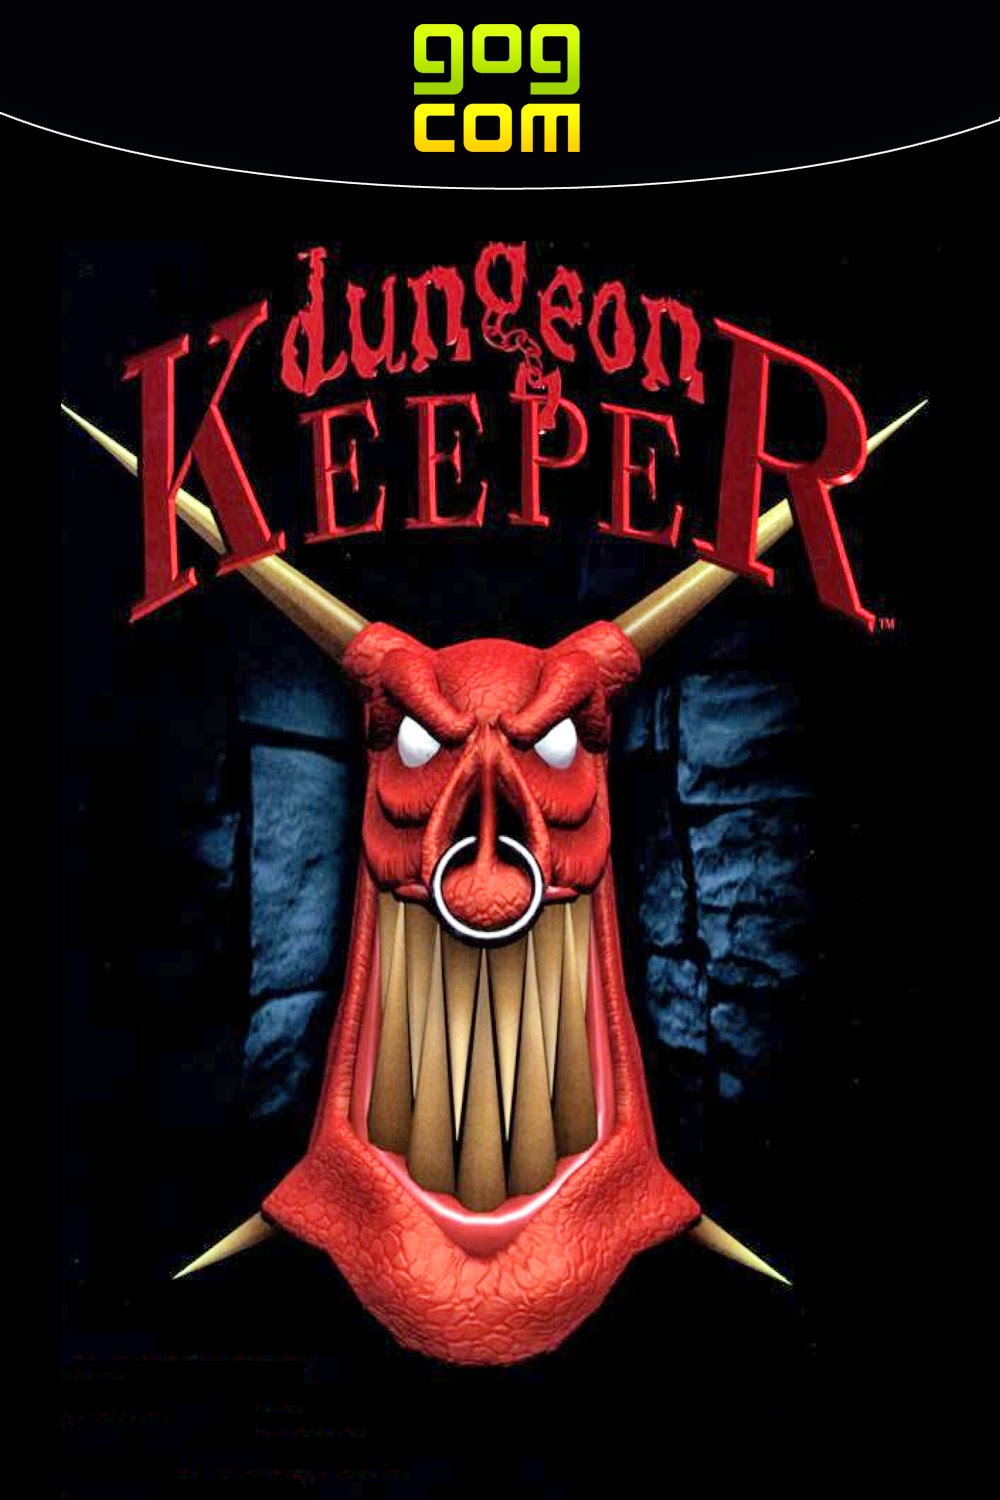 http://www.gog.com/game/dungeon_keeper